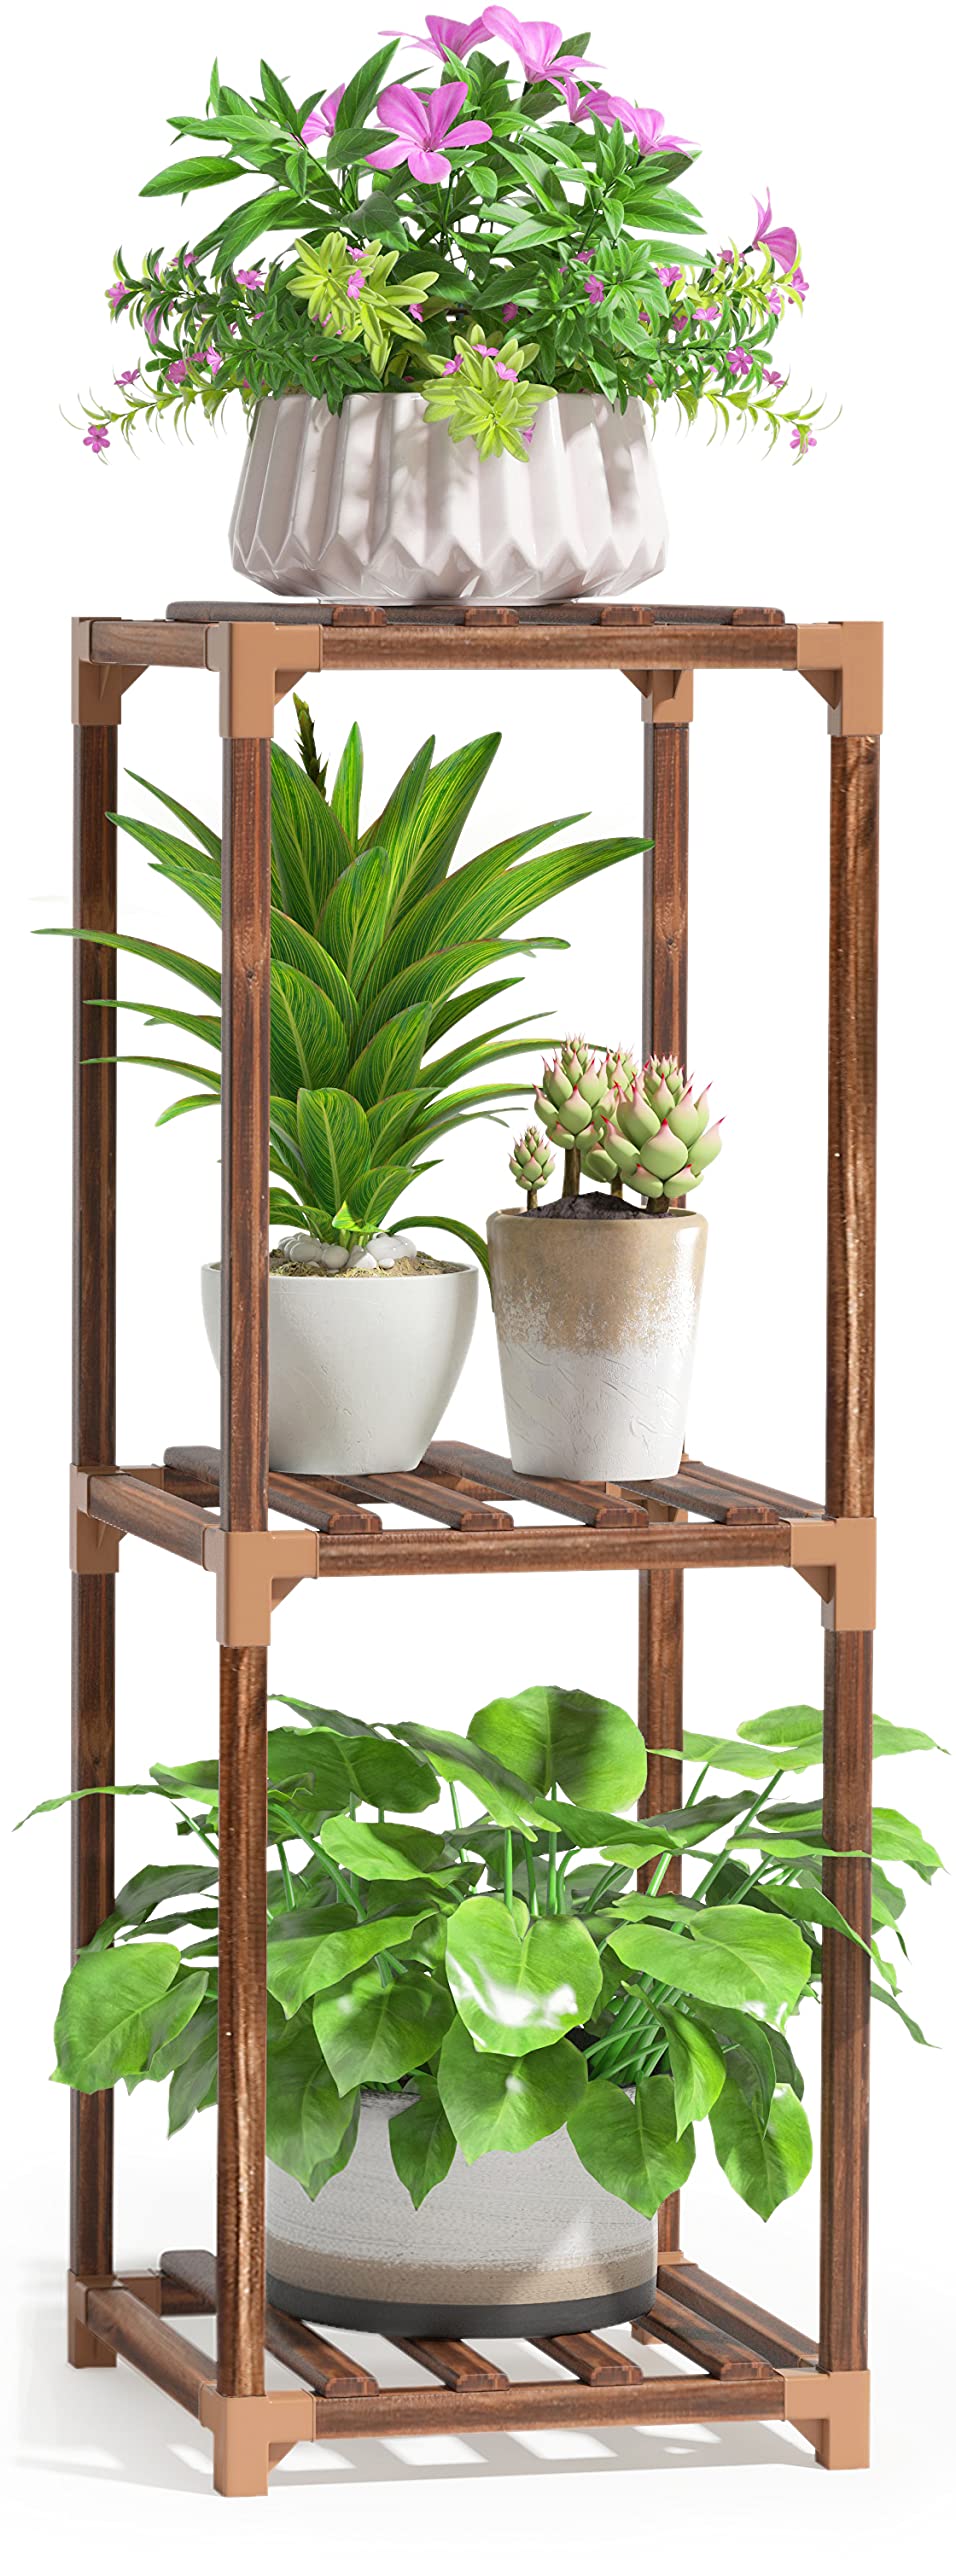 cfmour Wood Plant Stand Indoor